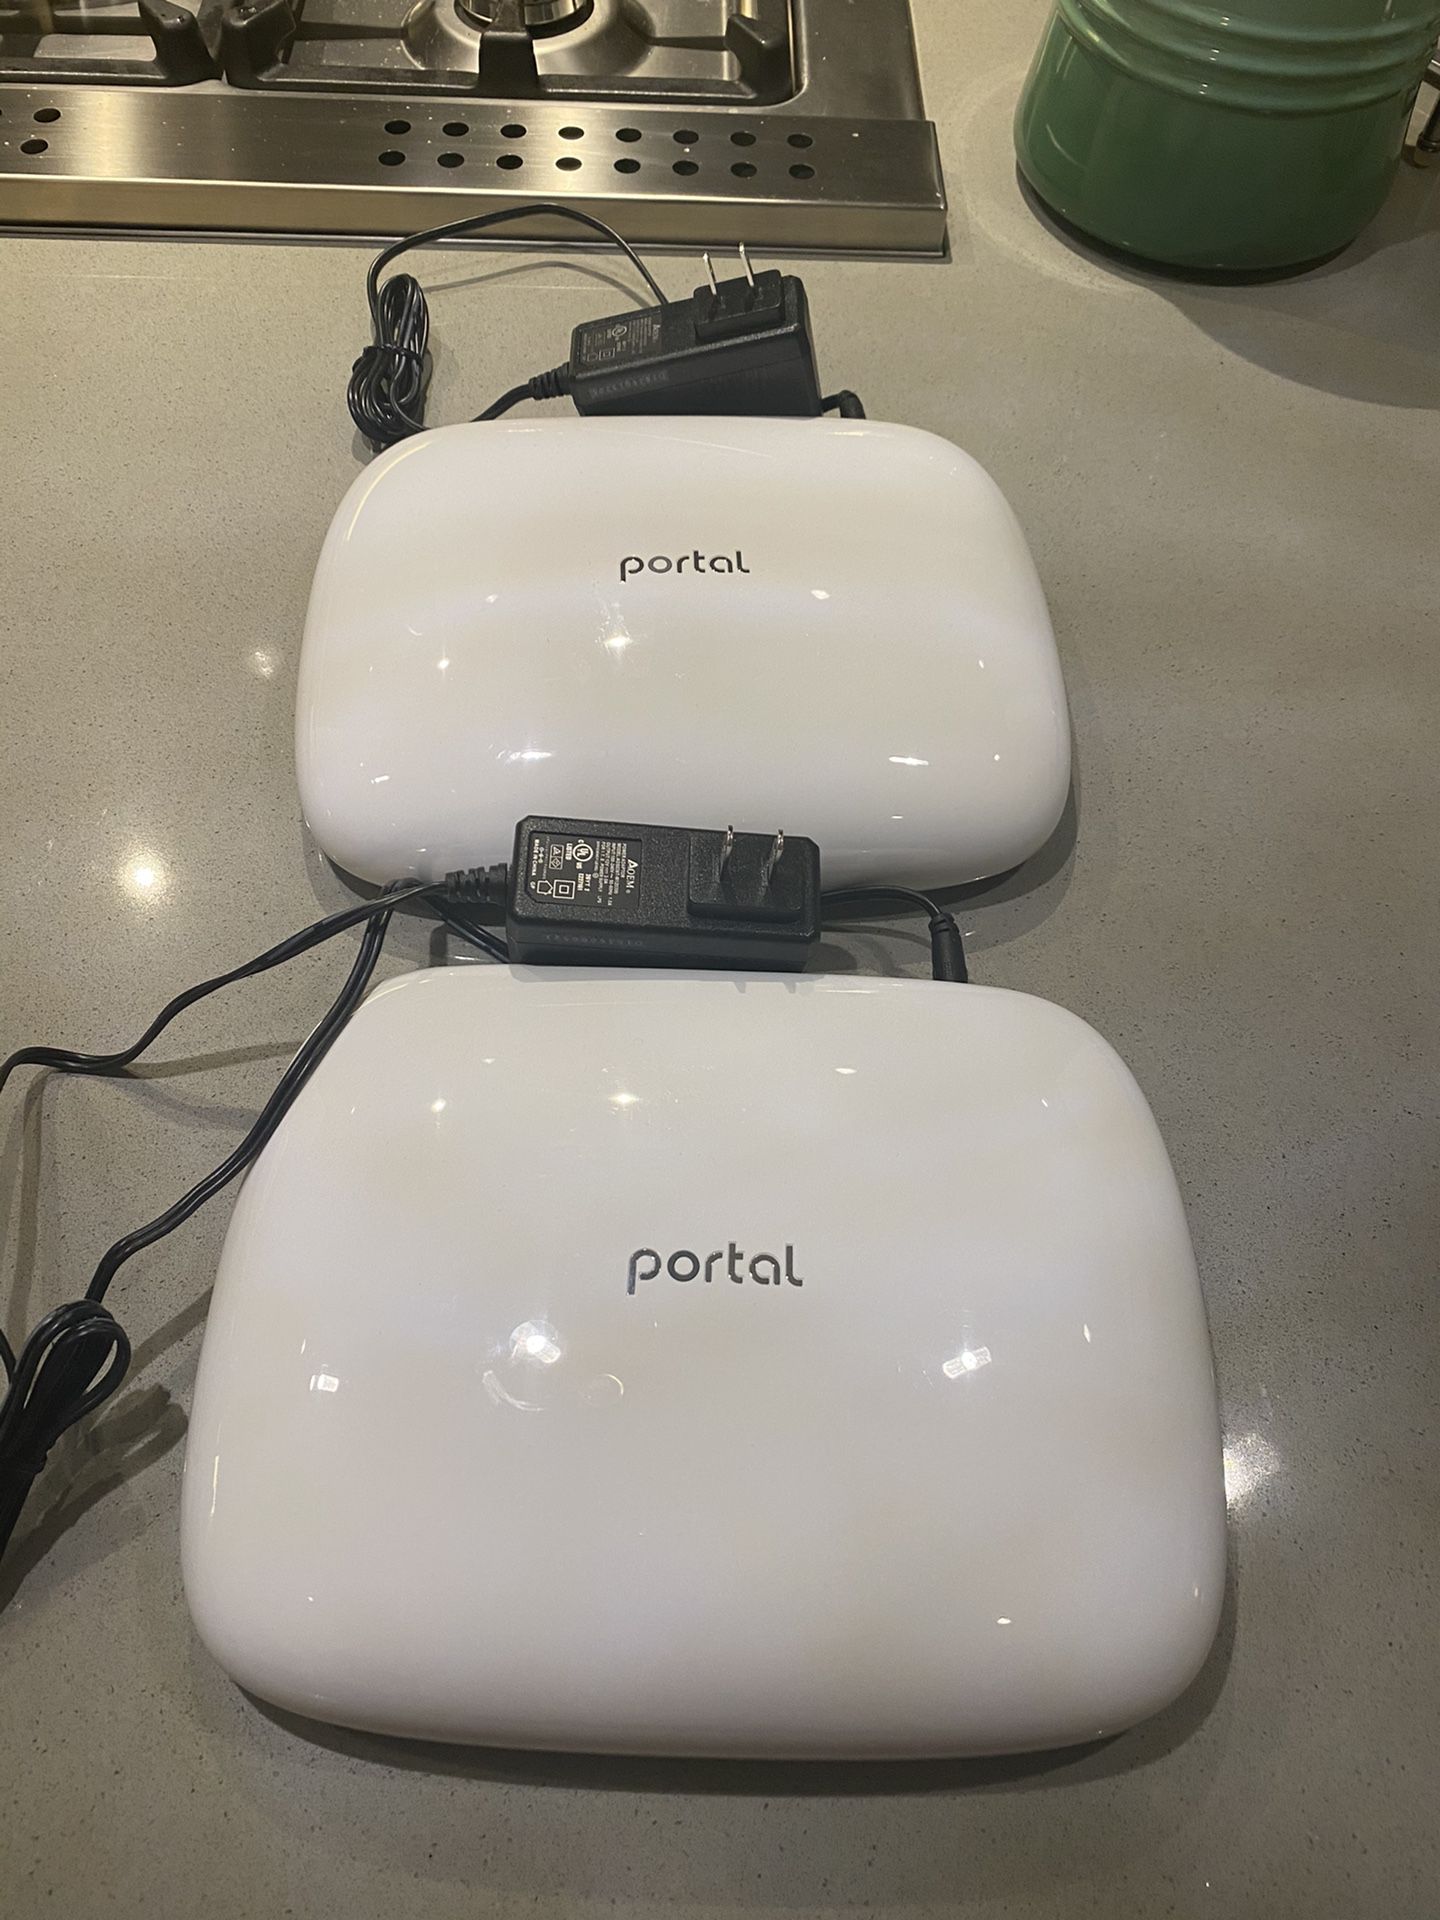 Portal Mesh wifi Router - FastLane ($50 each, can sell together or individually)